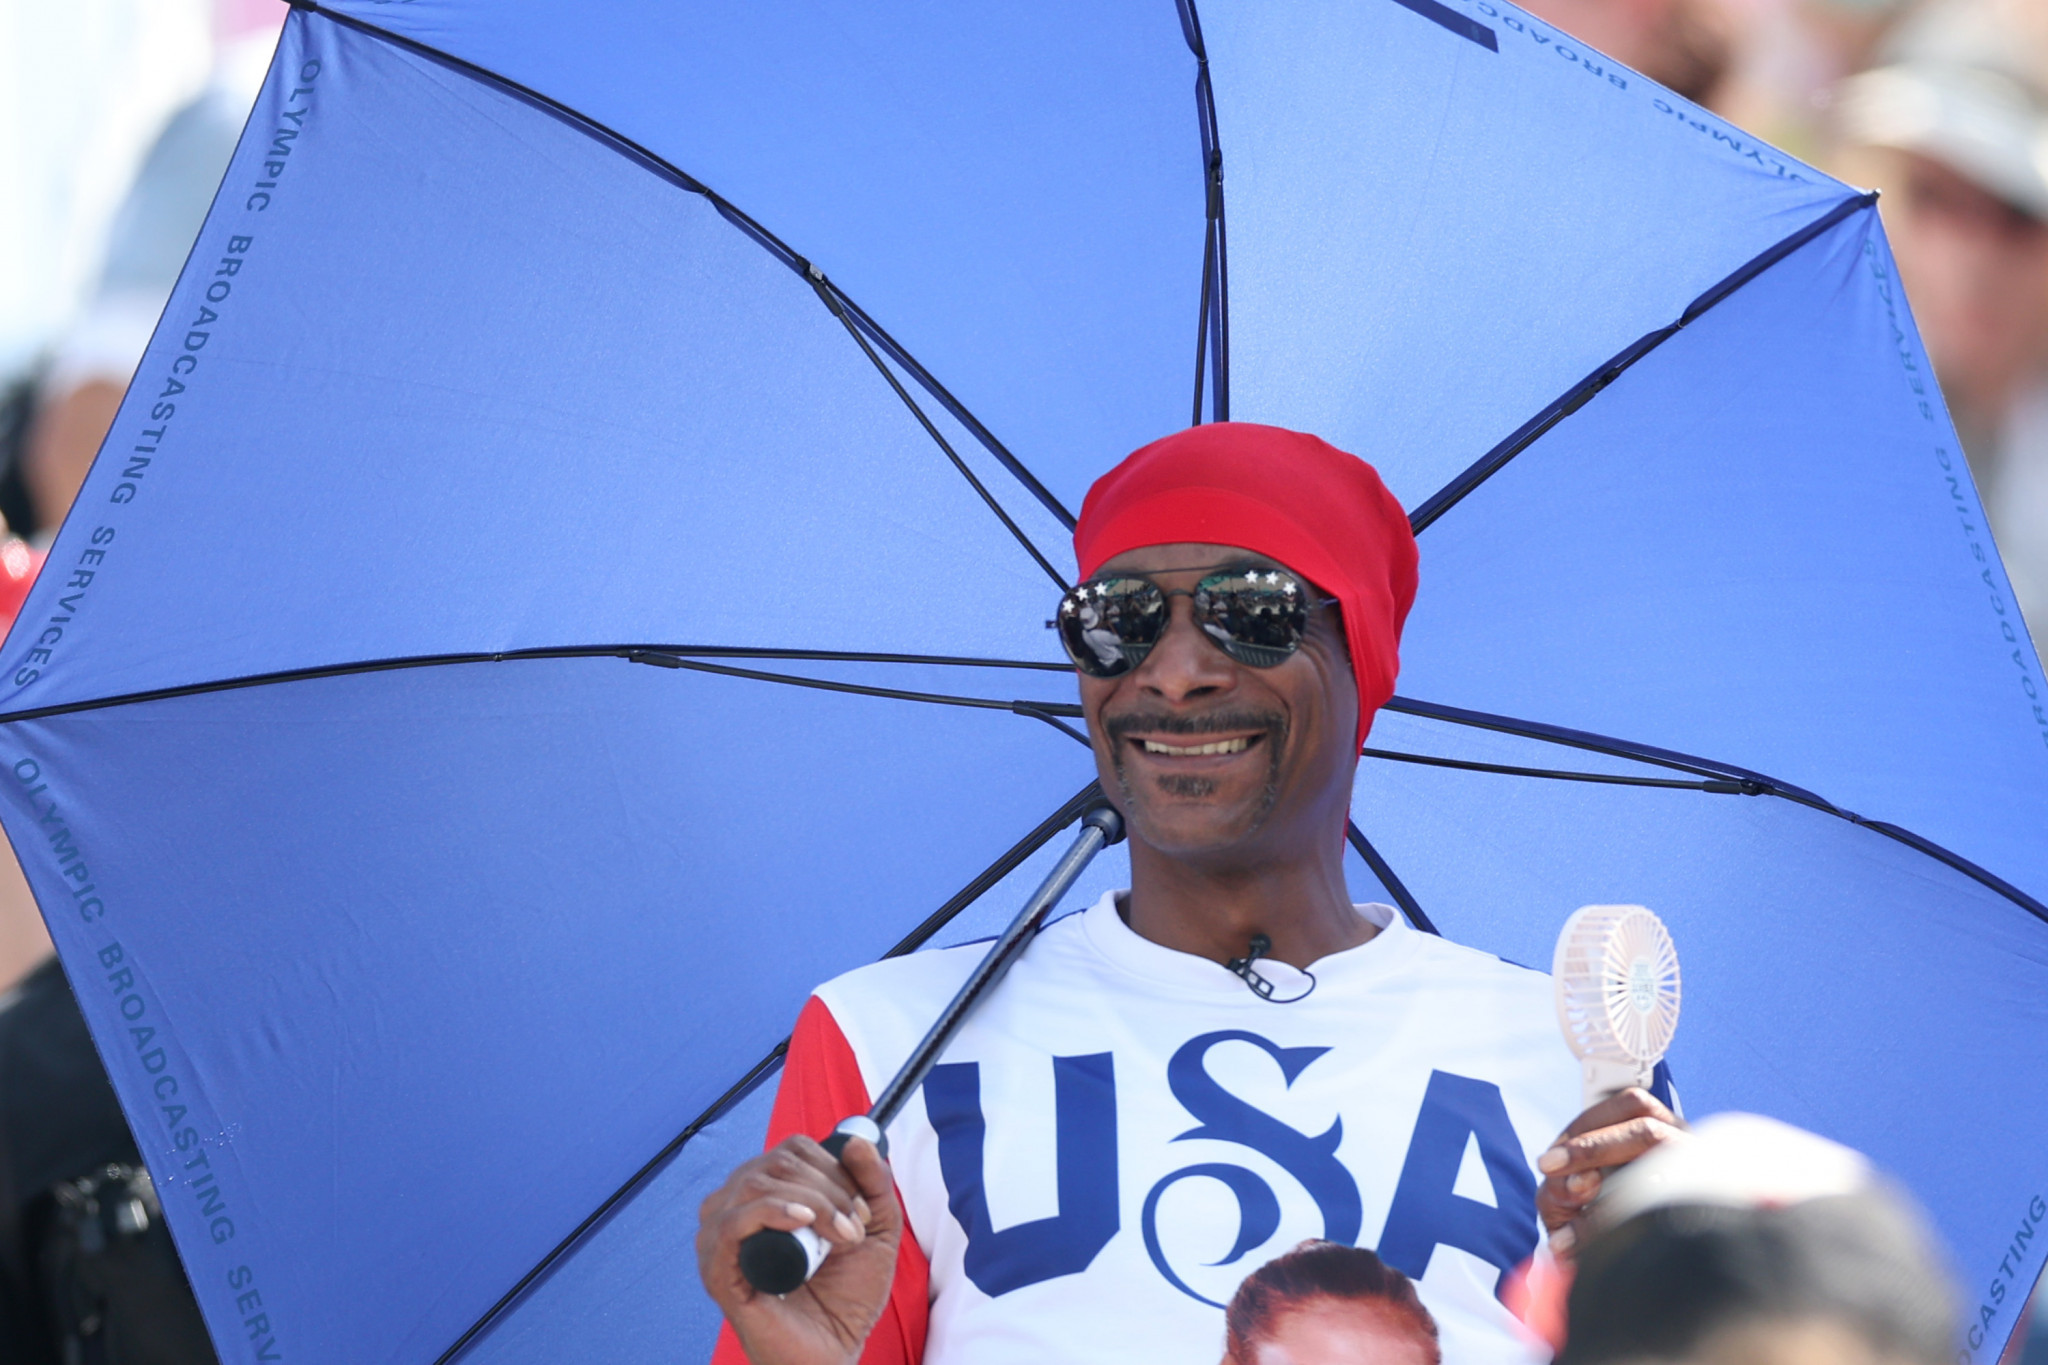 Snoop Dogg sheltering from the sun while watching a Team United States beach volleyball match at the Paris 2024 Olympic Games. GETTY IMAGES